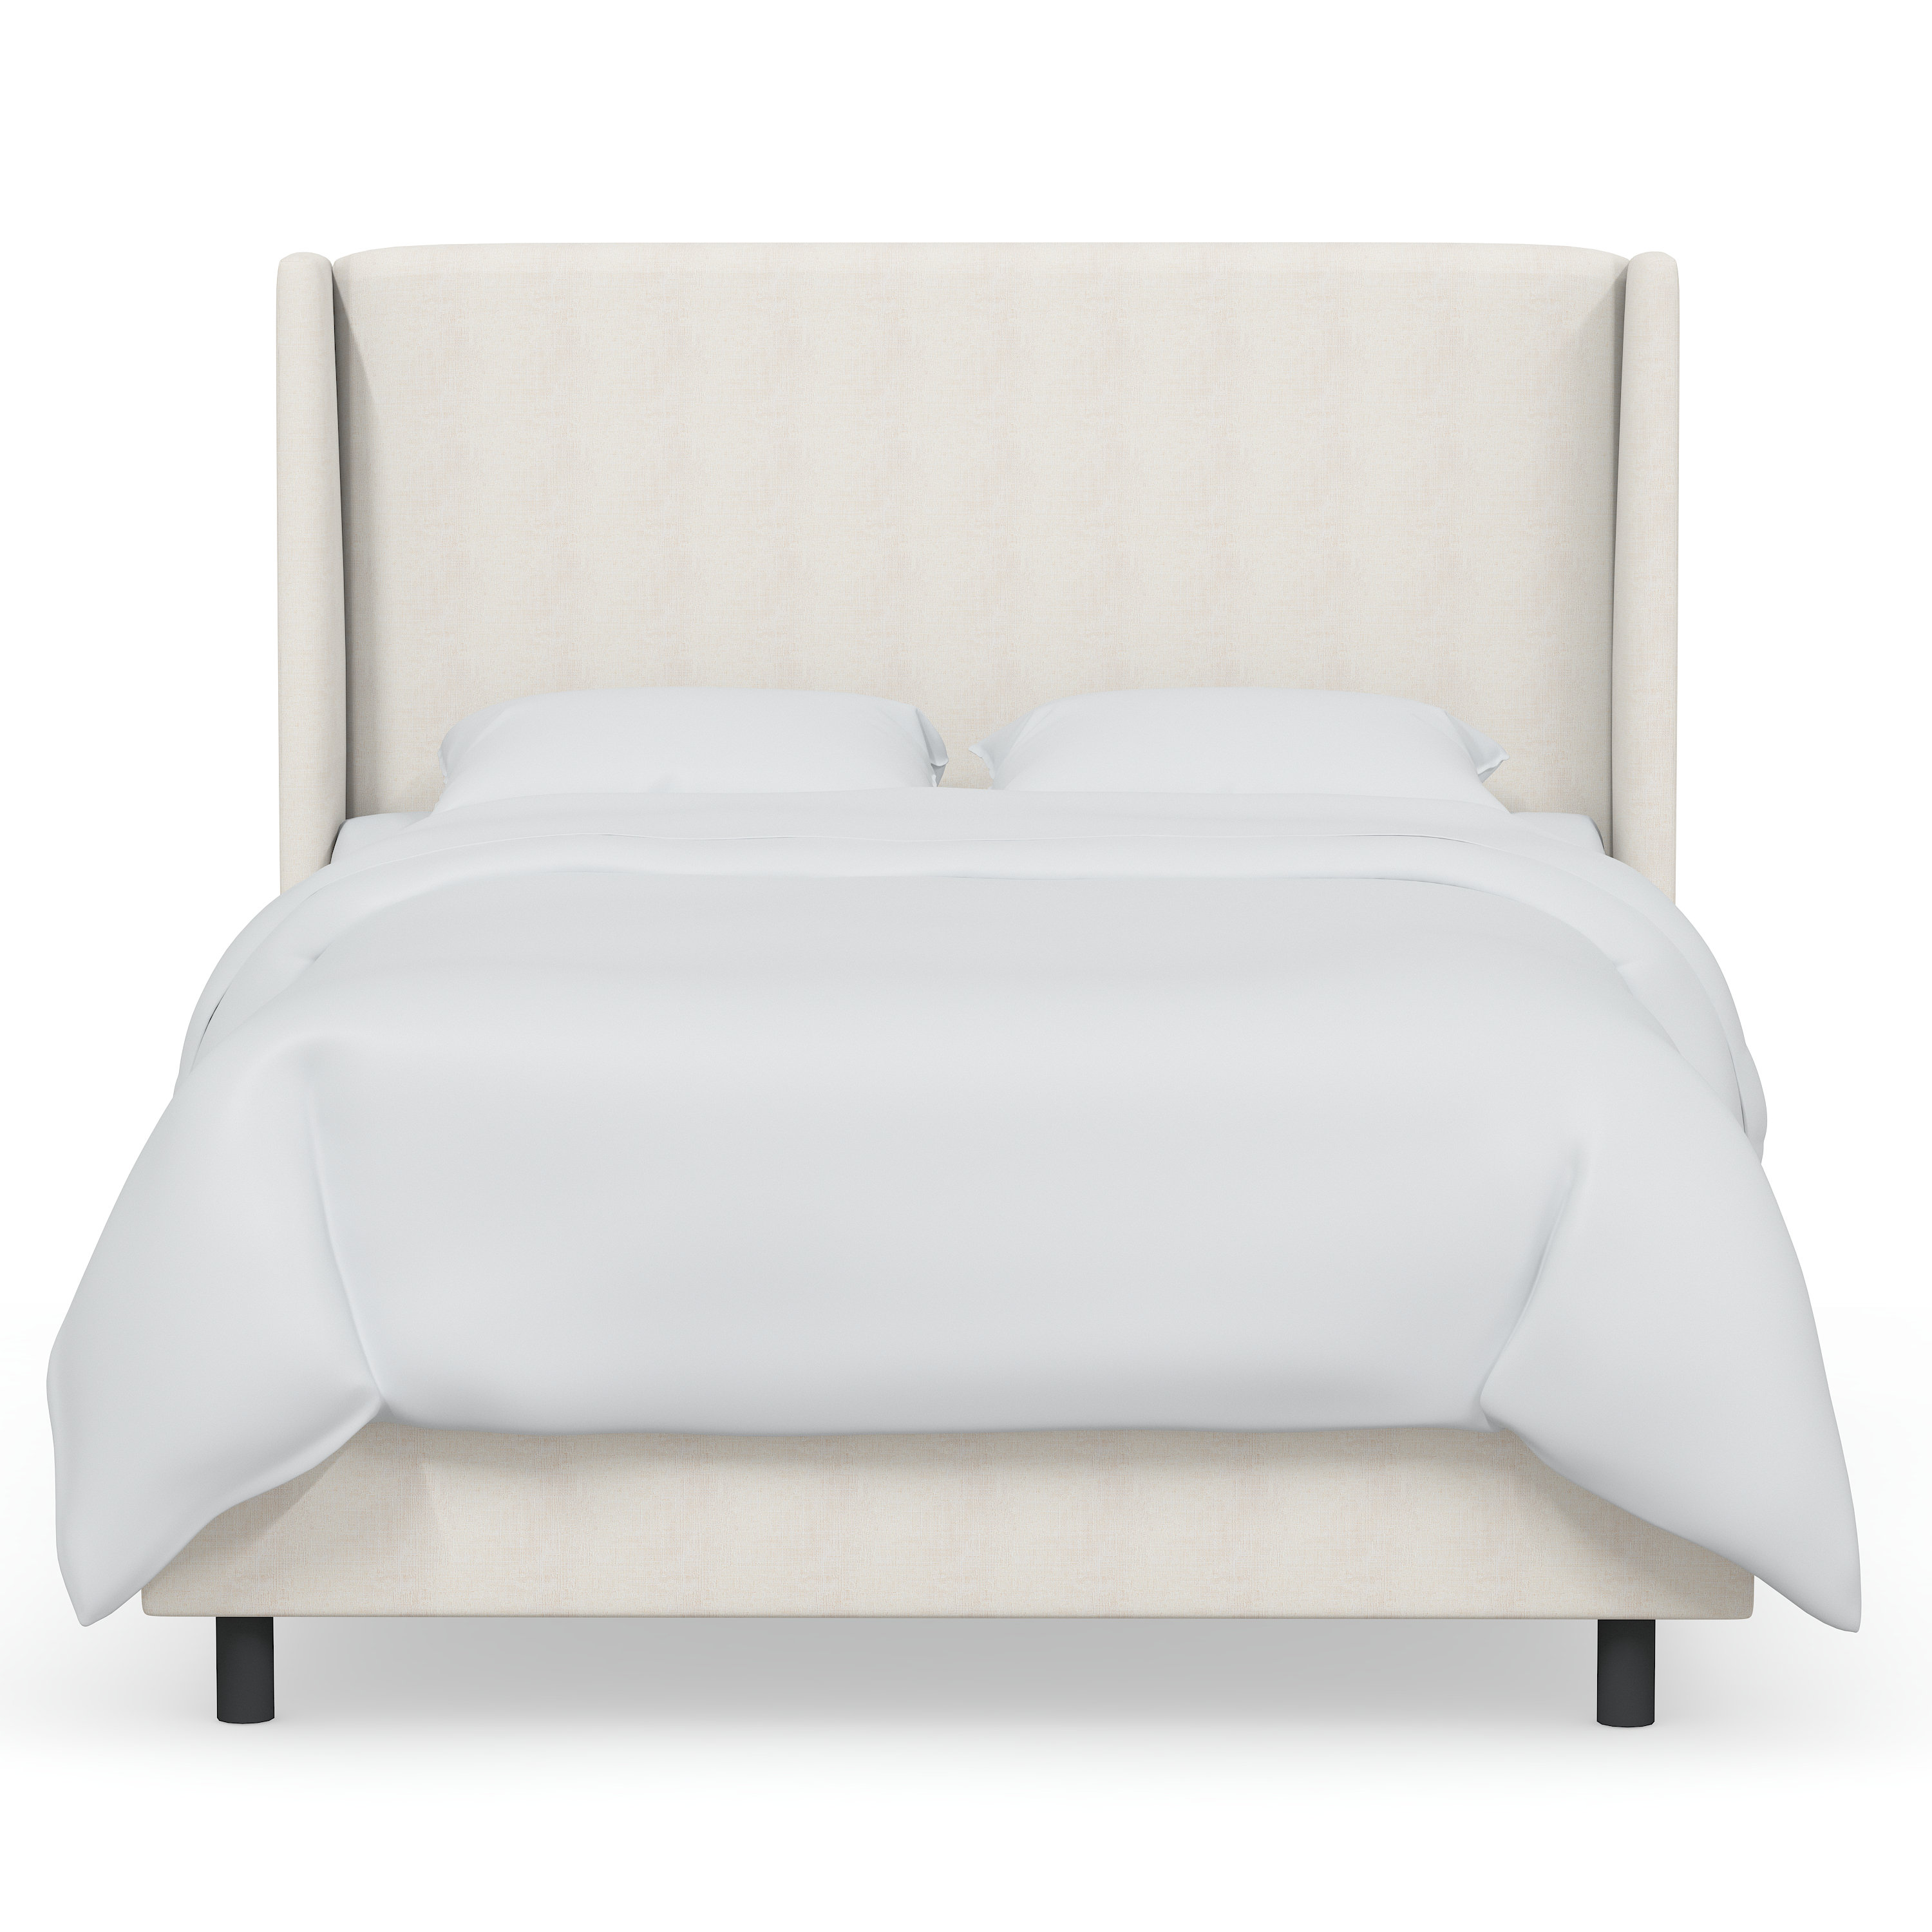 Tilly Upholstered Bed Color: Zuma White Textured Linen, Size: King